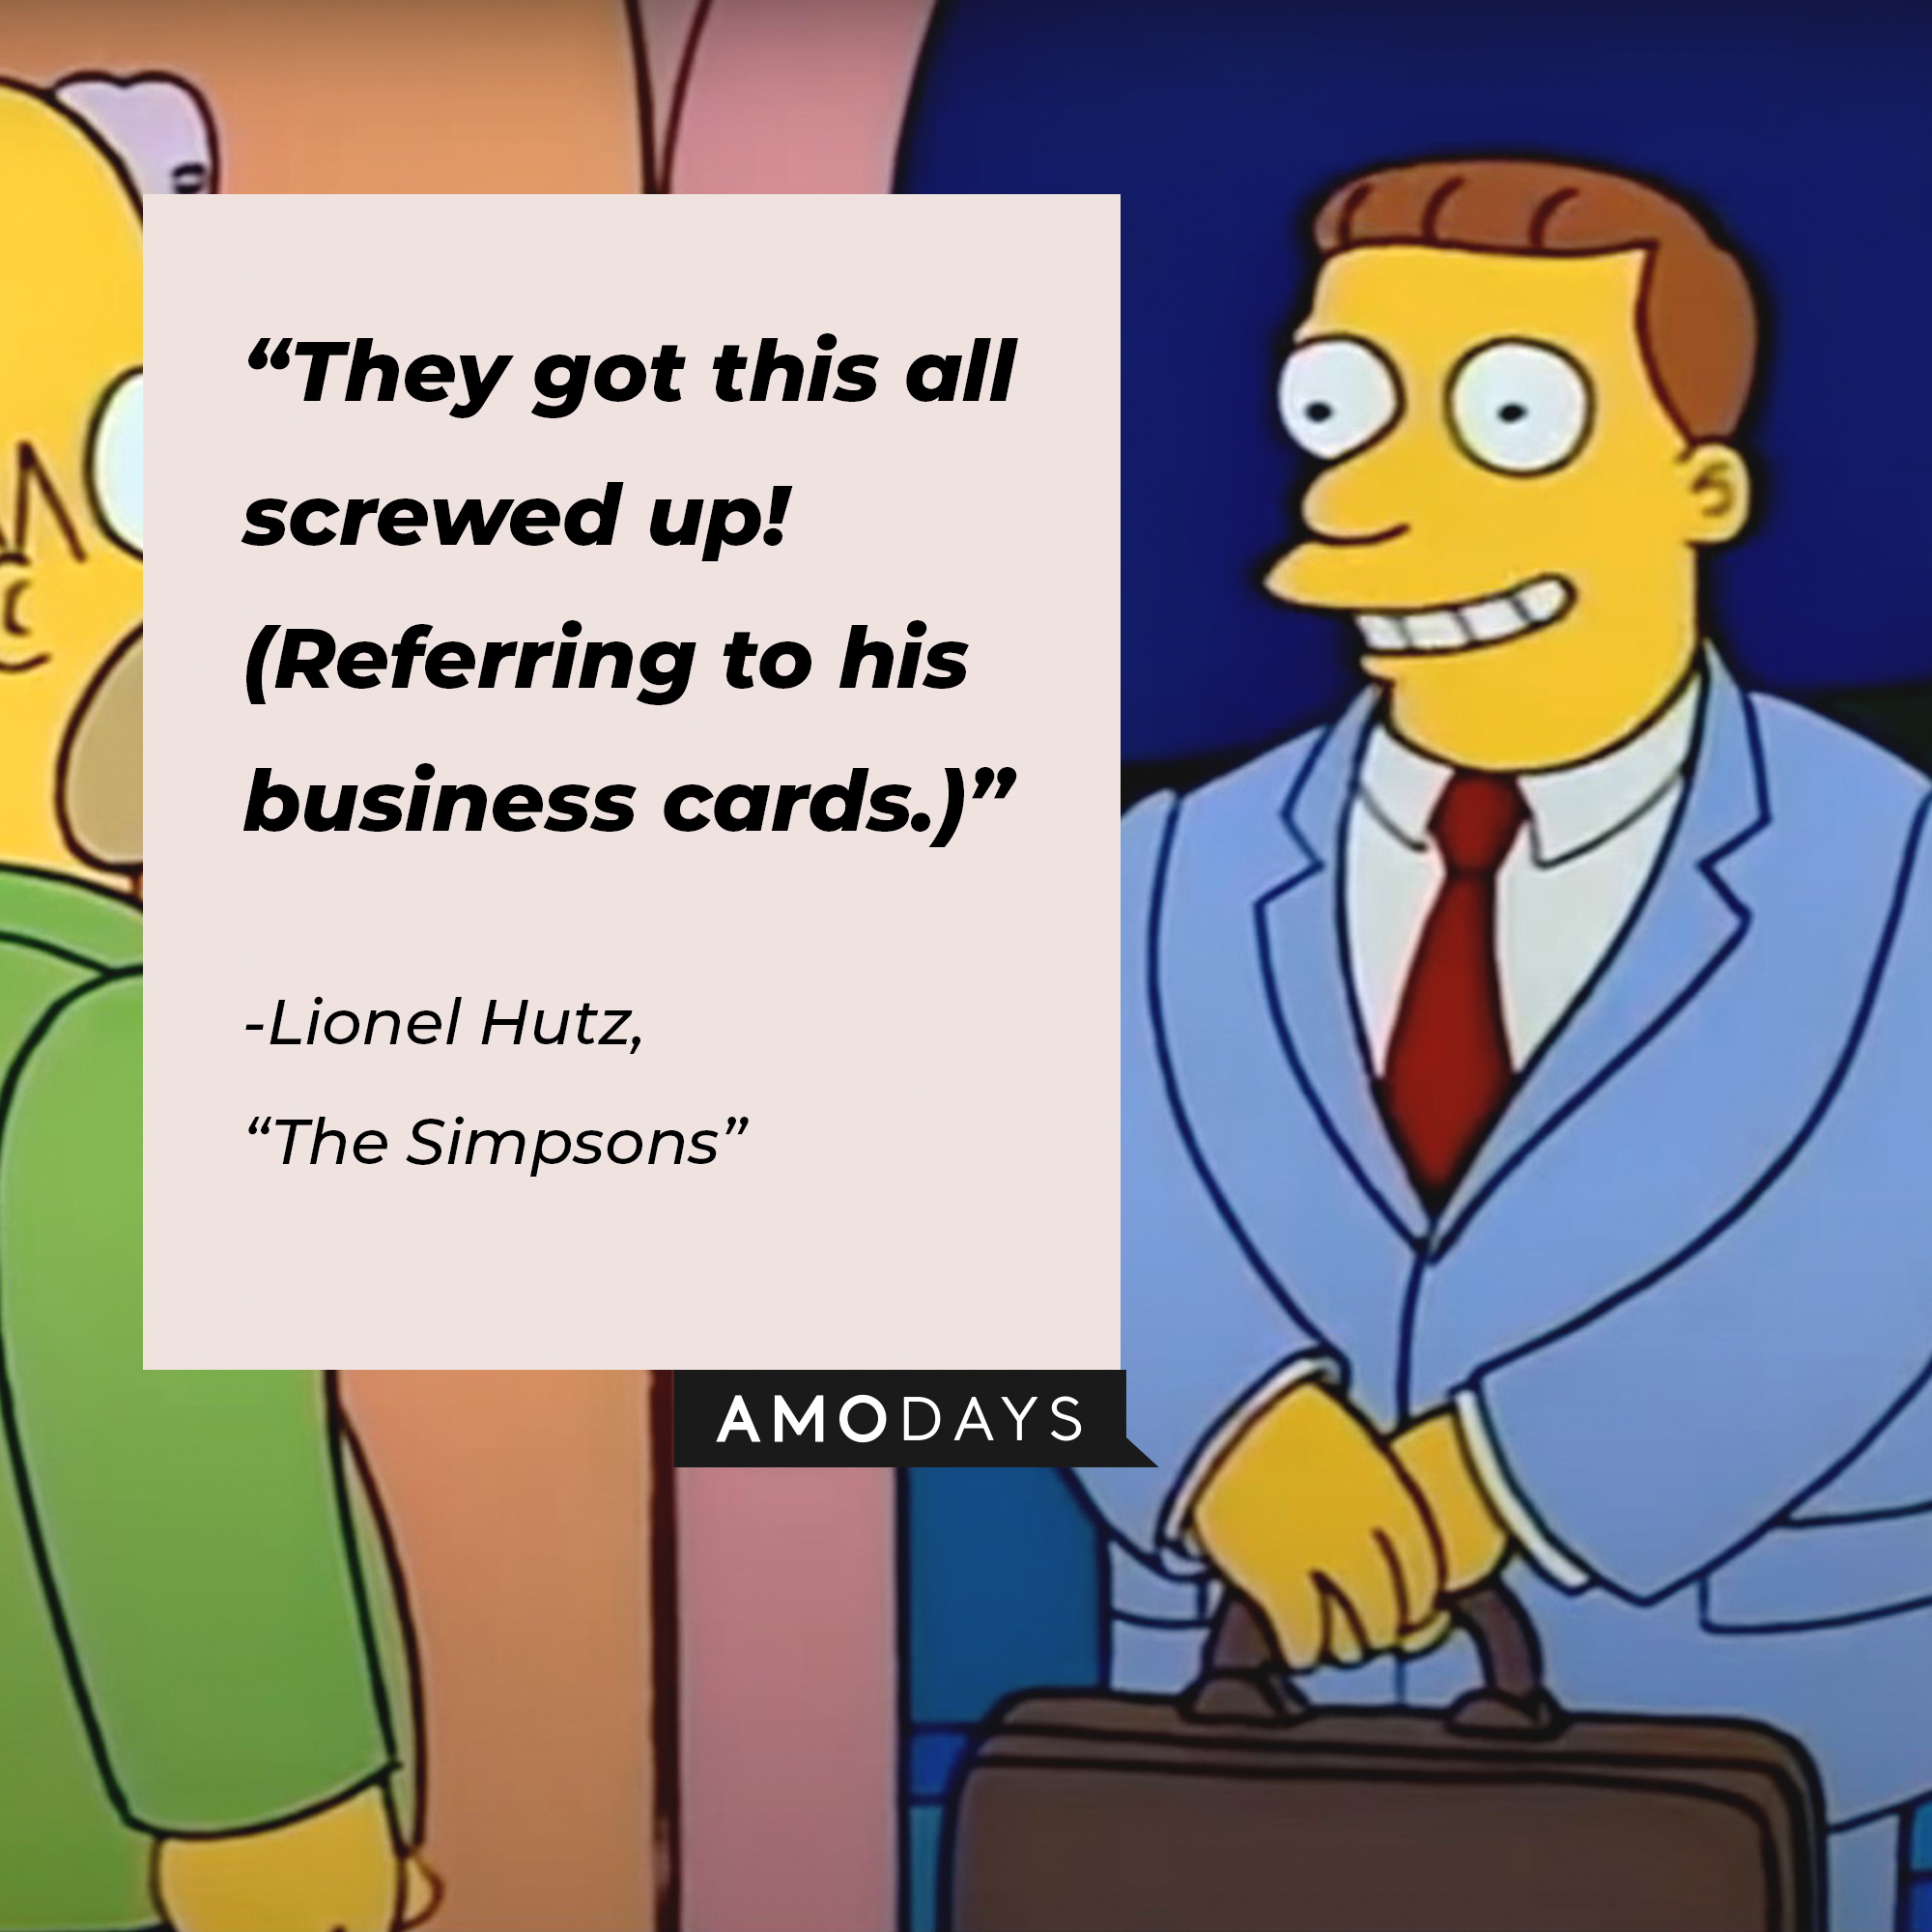 Lionel Hutz’s quote from “The Simpsons”: “They got this all screwed up! (Referring to his business cards.)” | Source: facebook.com/TheSimpsons